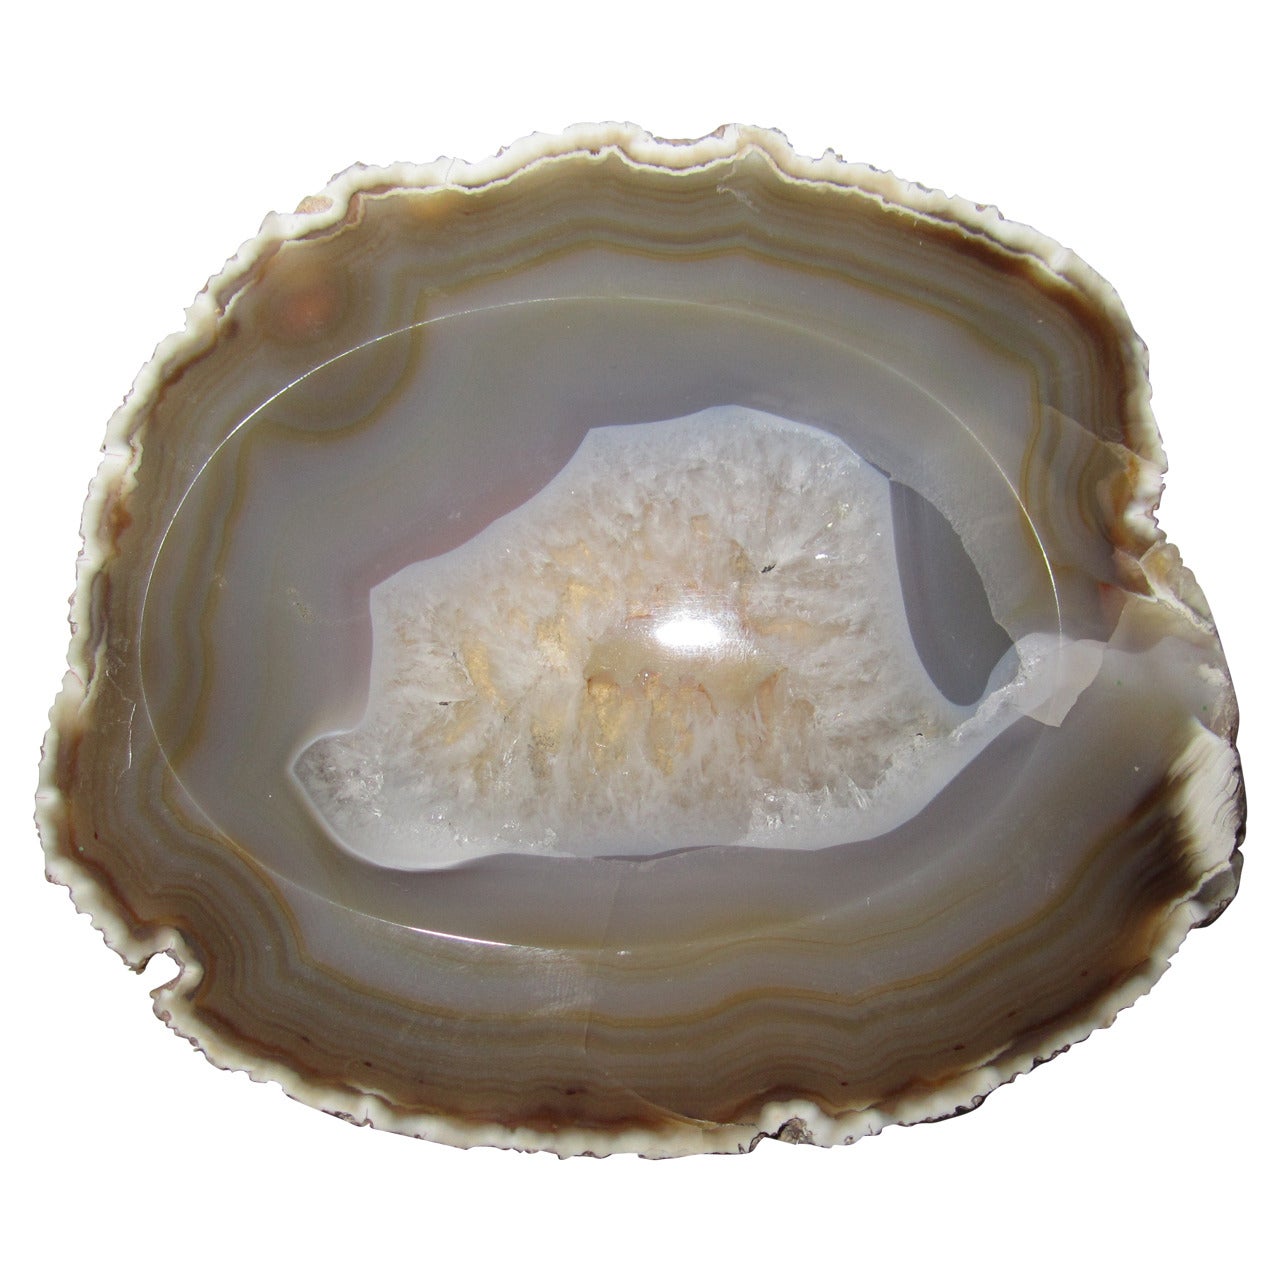 Geode Bowl or Dish in Shades of White, Grey and Brown